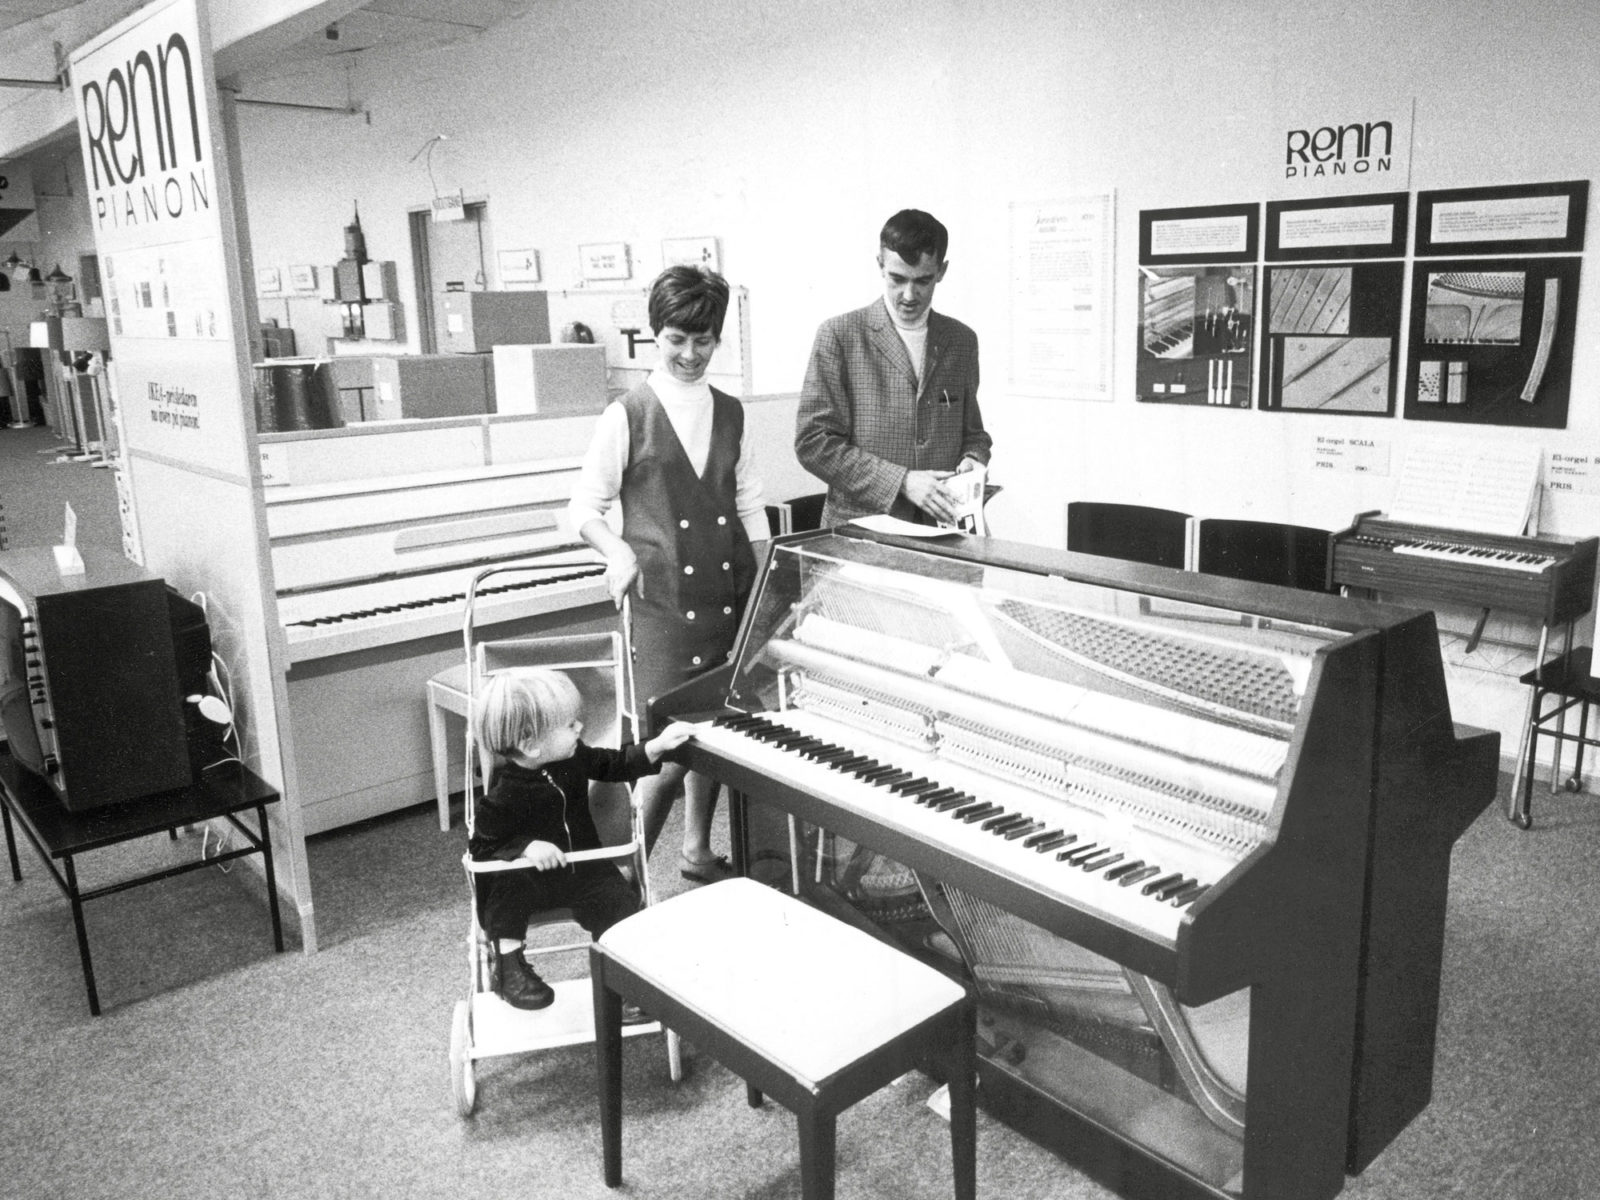 Young family, man, woman and child in pram, looking at pianos exhibited in furniture showroom at IKEA 1973.